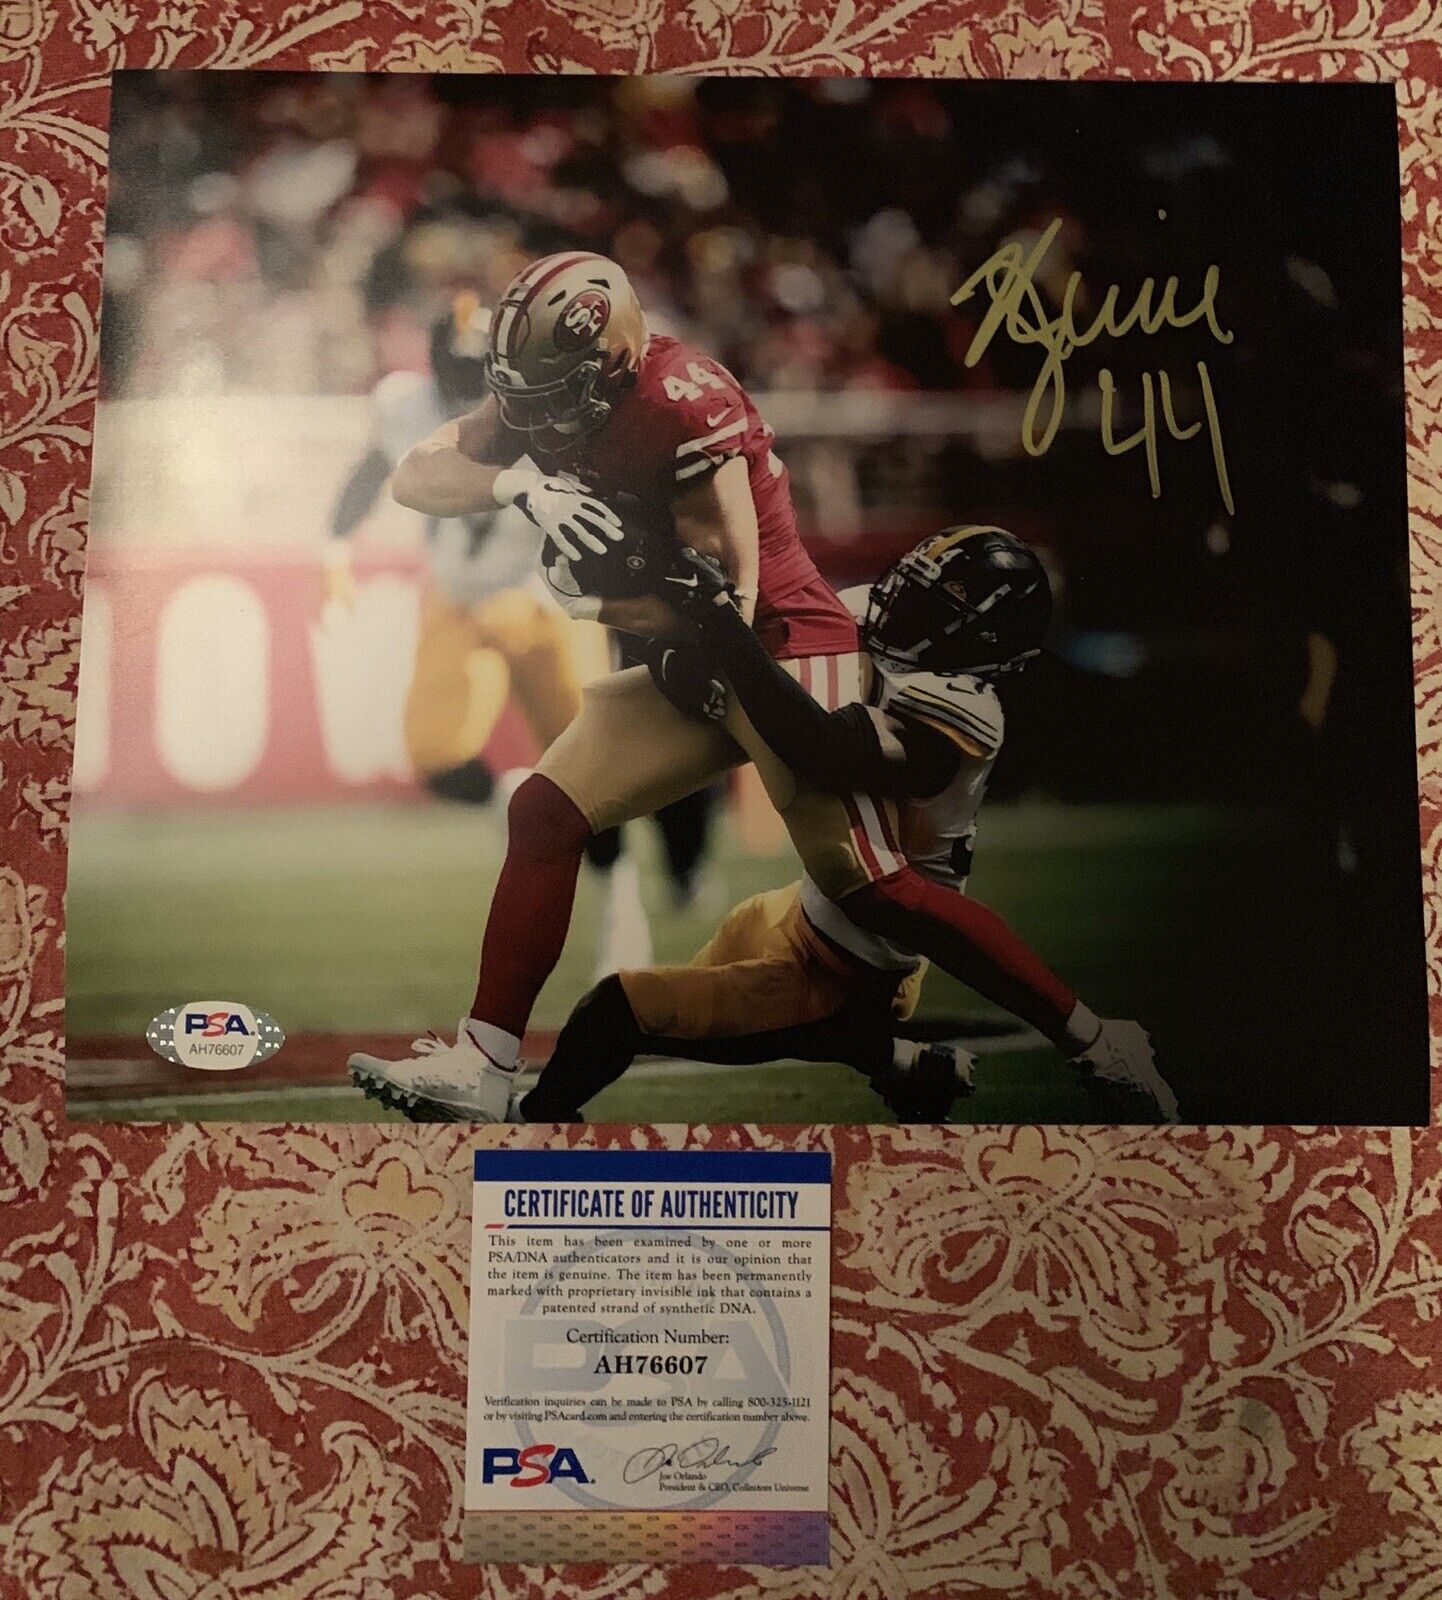 kyle juszczyk Signed Autographed 8x10 Picture Photo Poster painting Niners 49ers